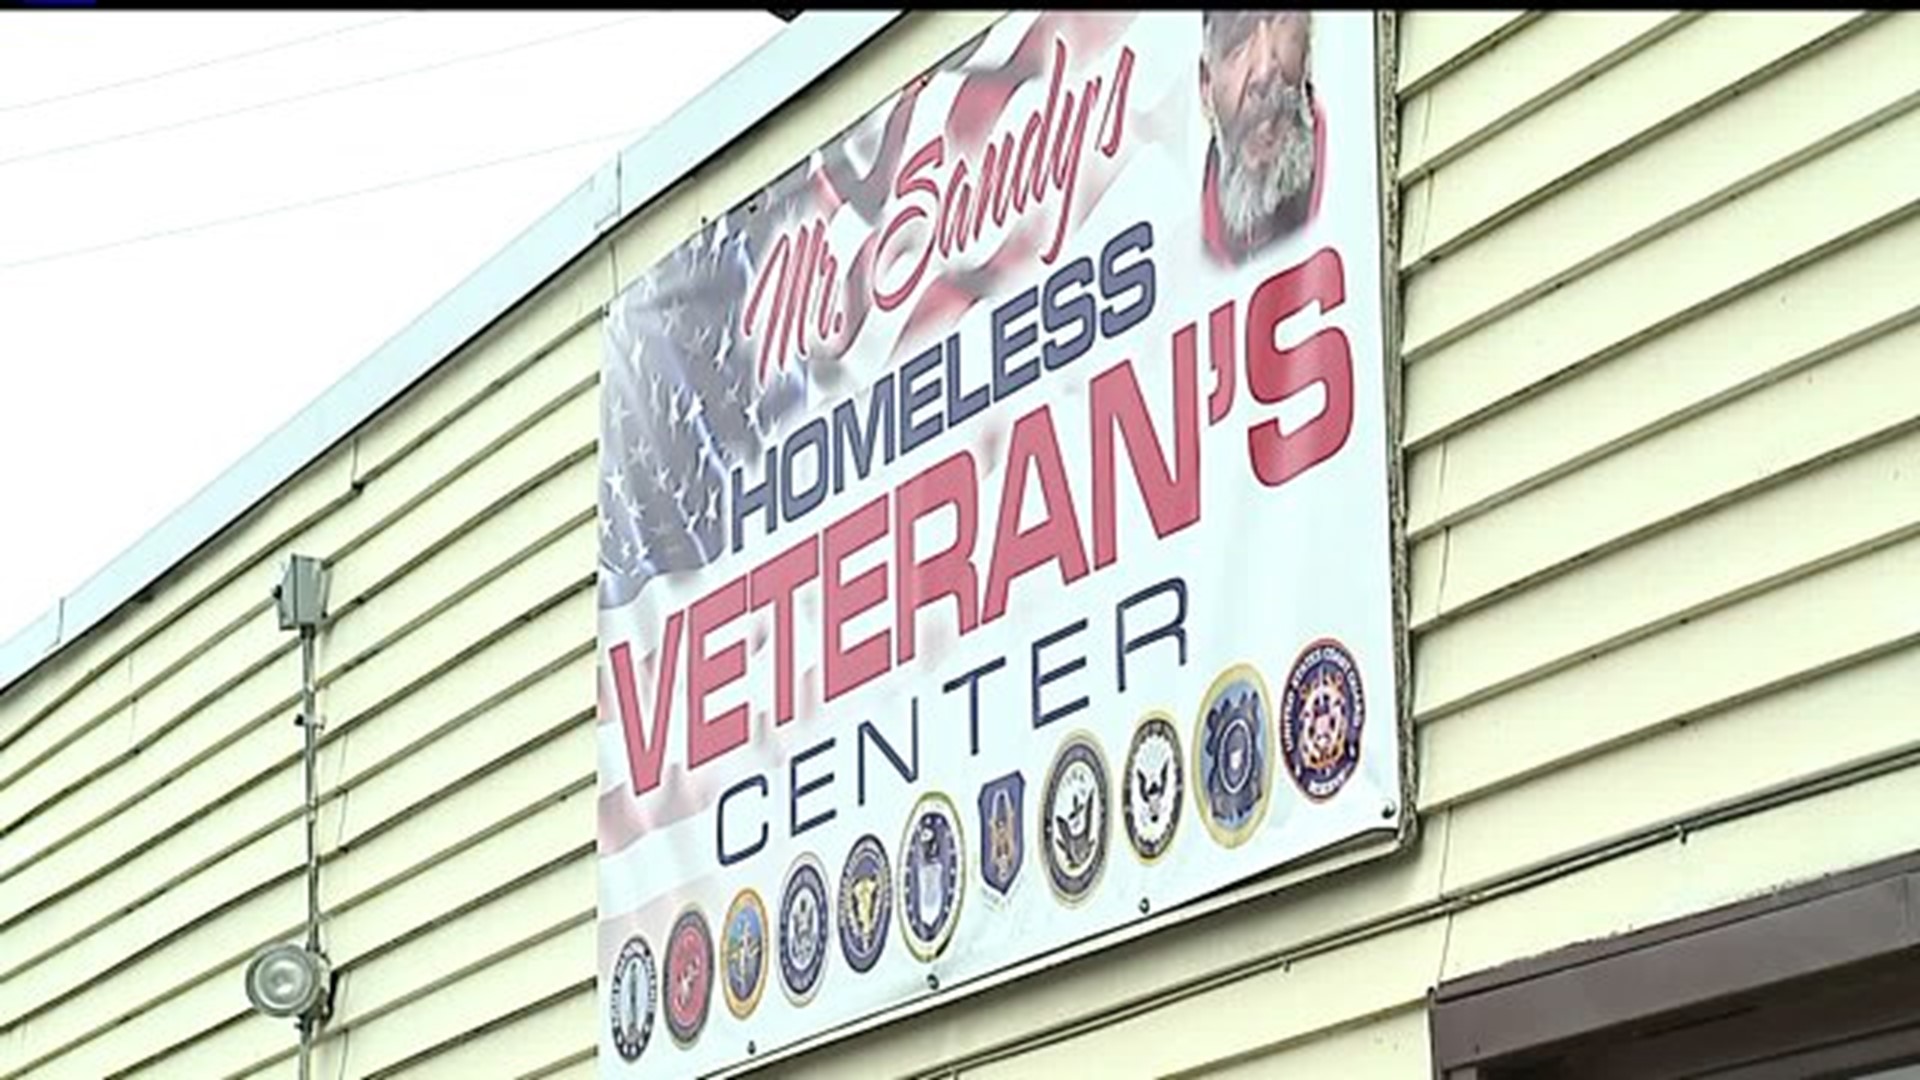 How much help is available for local veterans